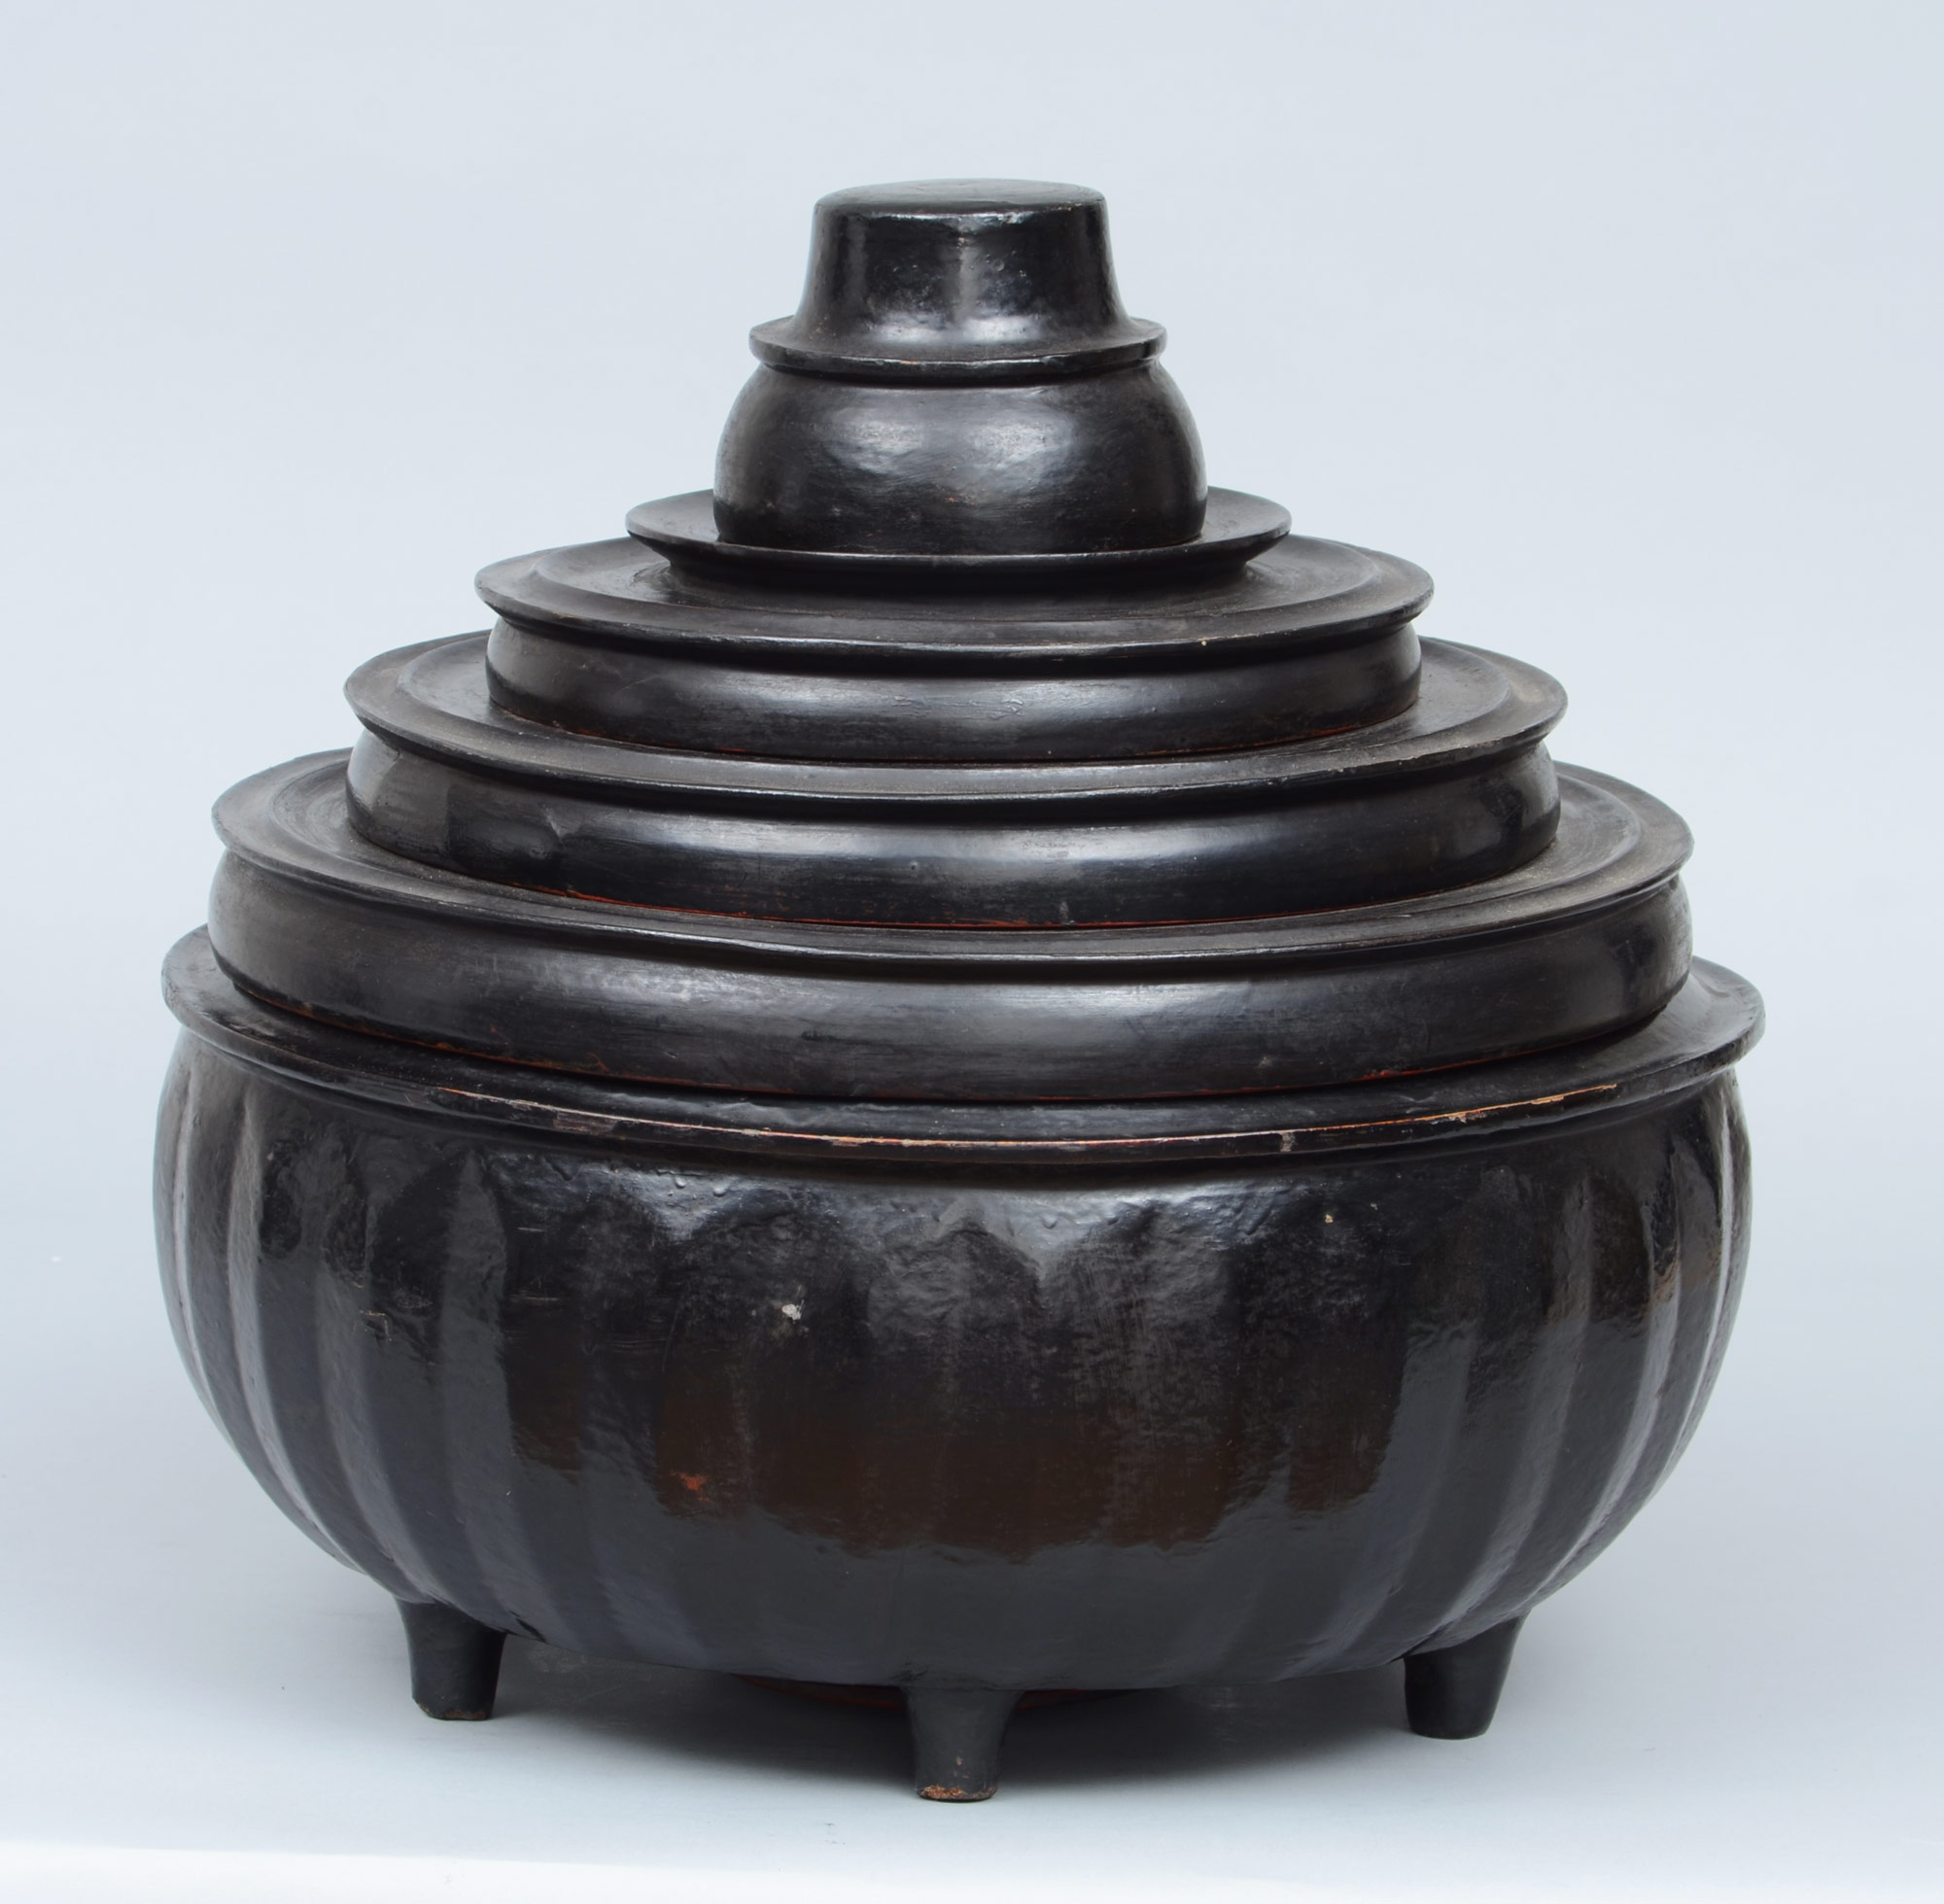 Black Lacquered Small Covered Bowls Mini Burmese Offering Bowl FREE SHIPPING.